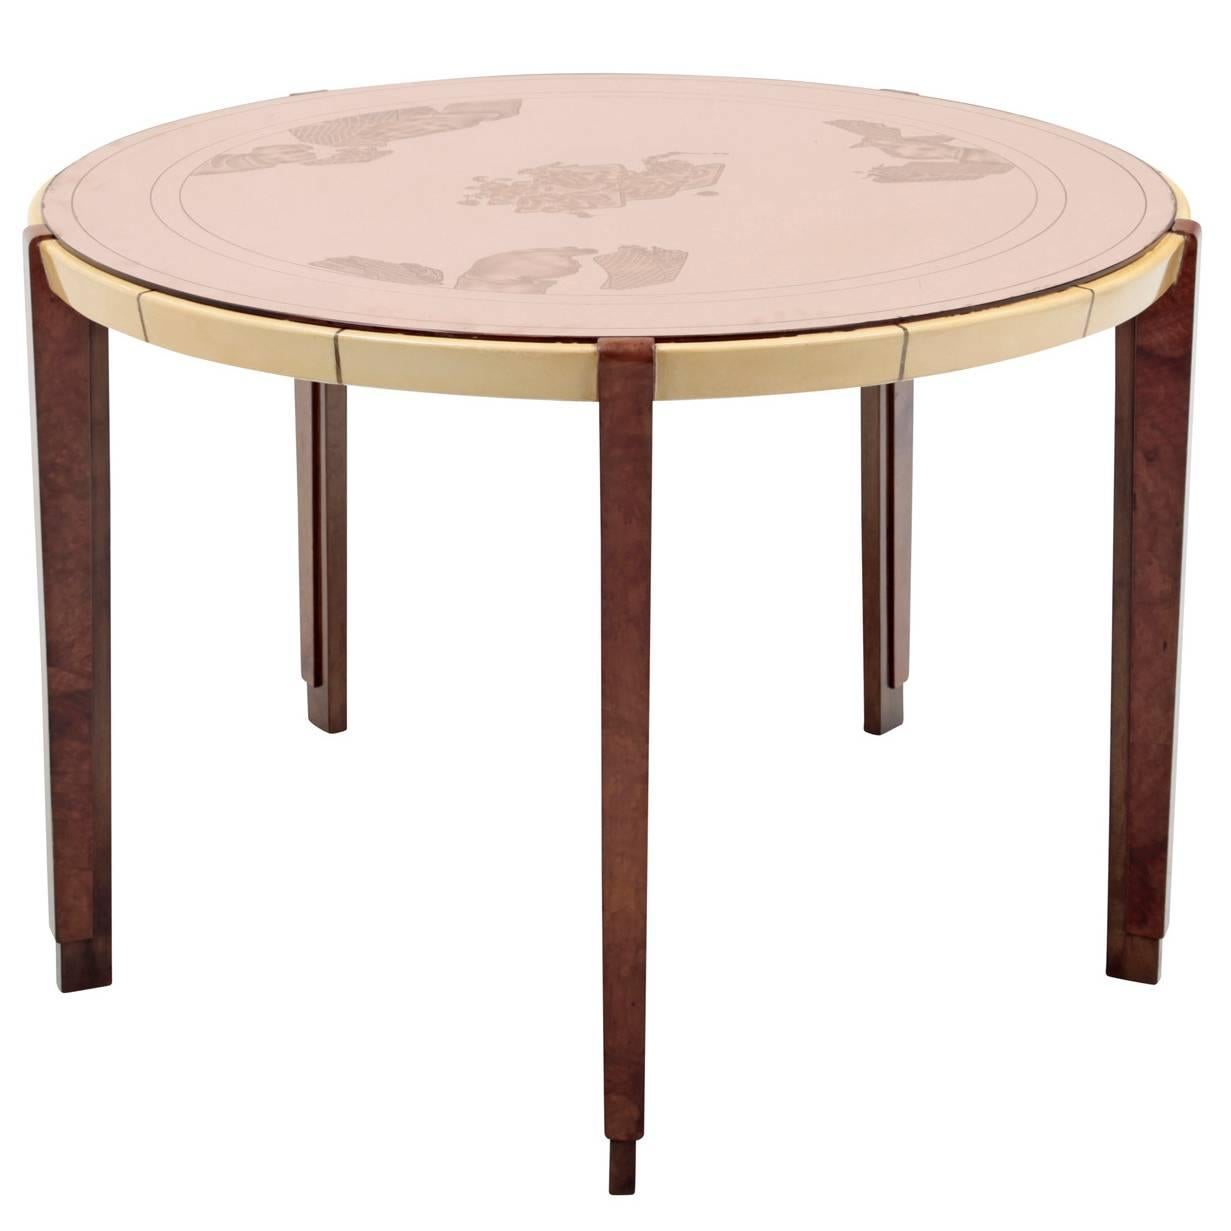 Game Table by Fontana from 1941